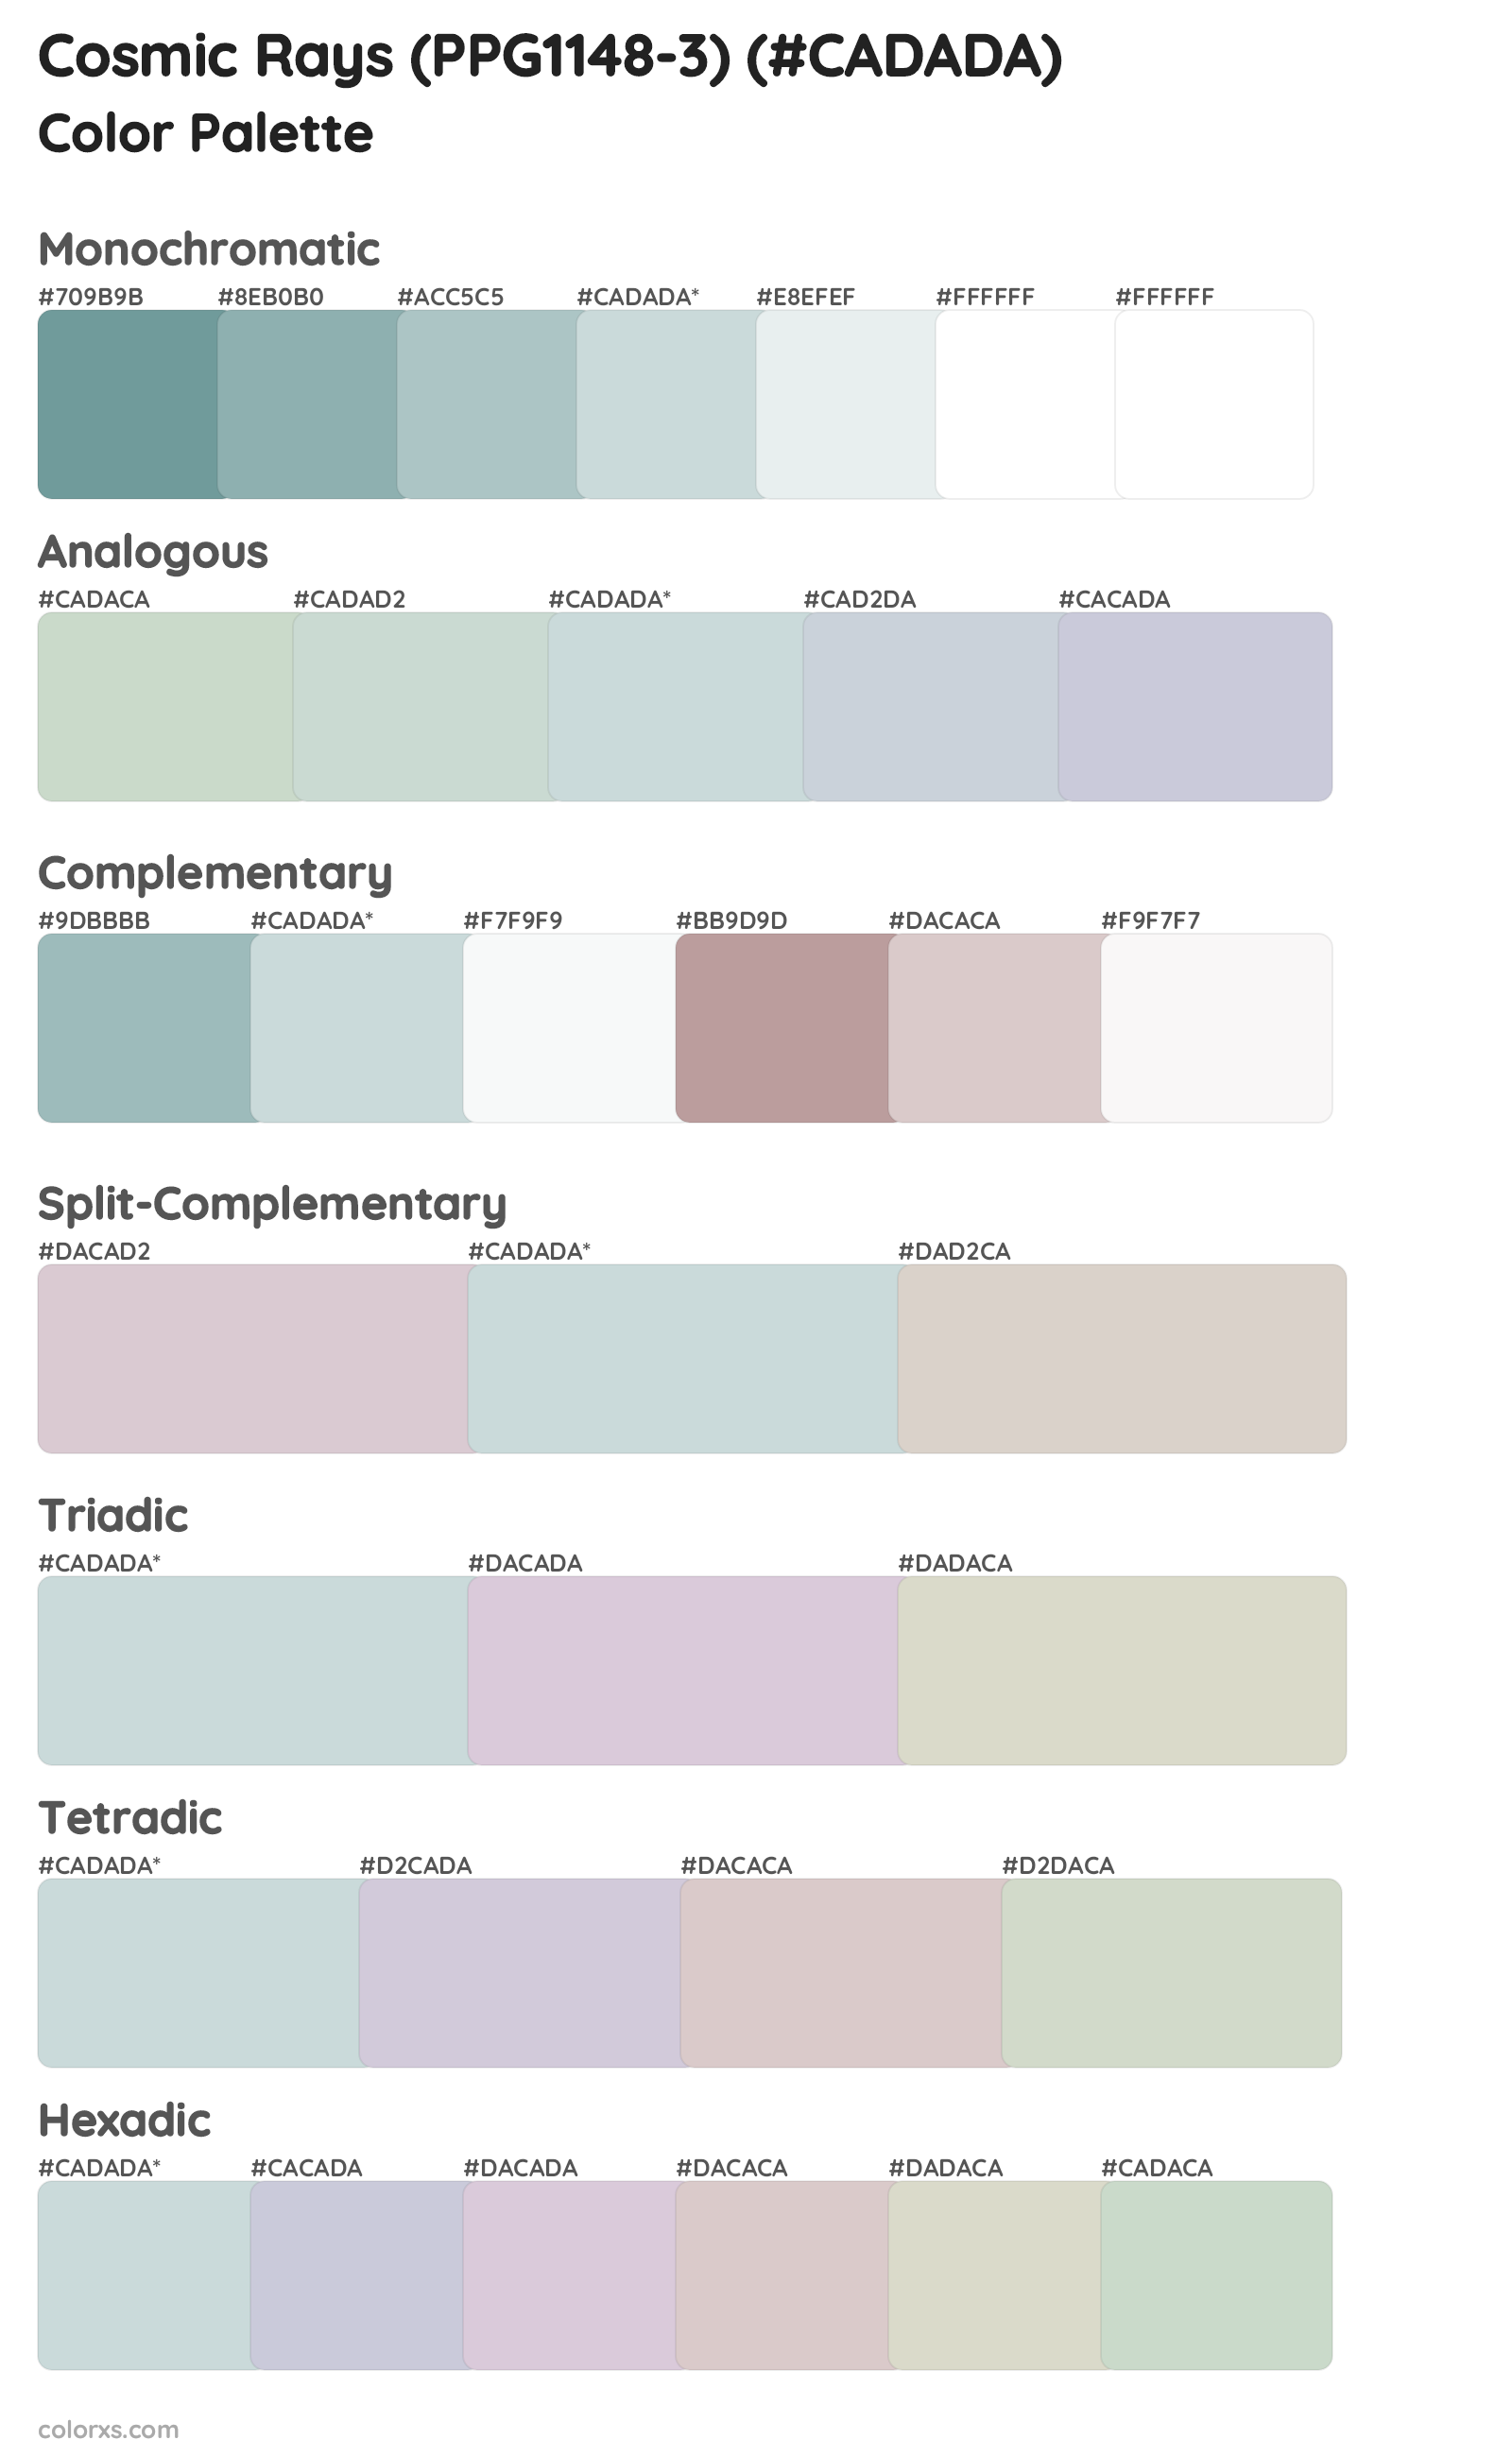 Cosmic Rays (PPG1148-3) Color Scheme Palettes